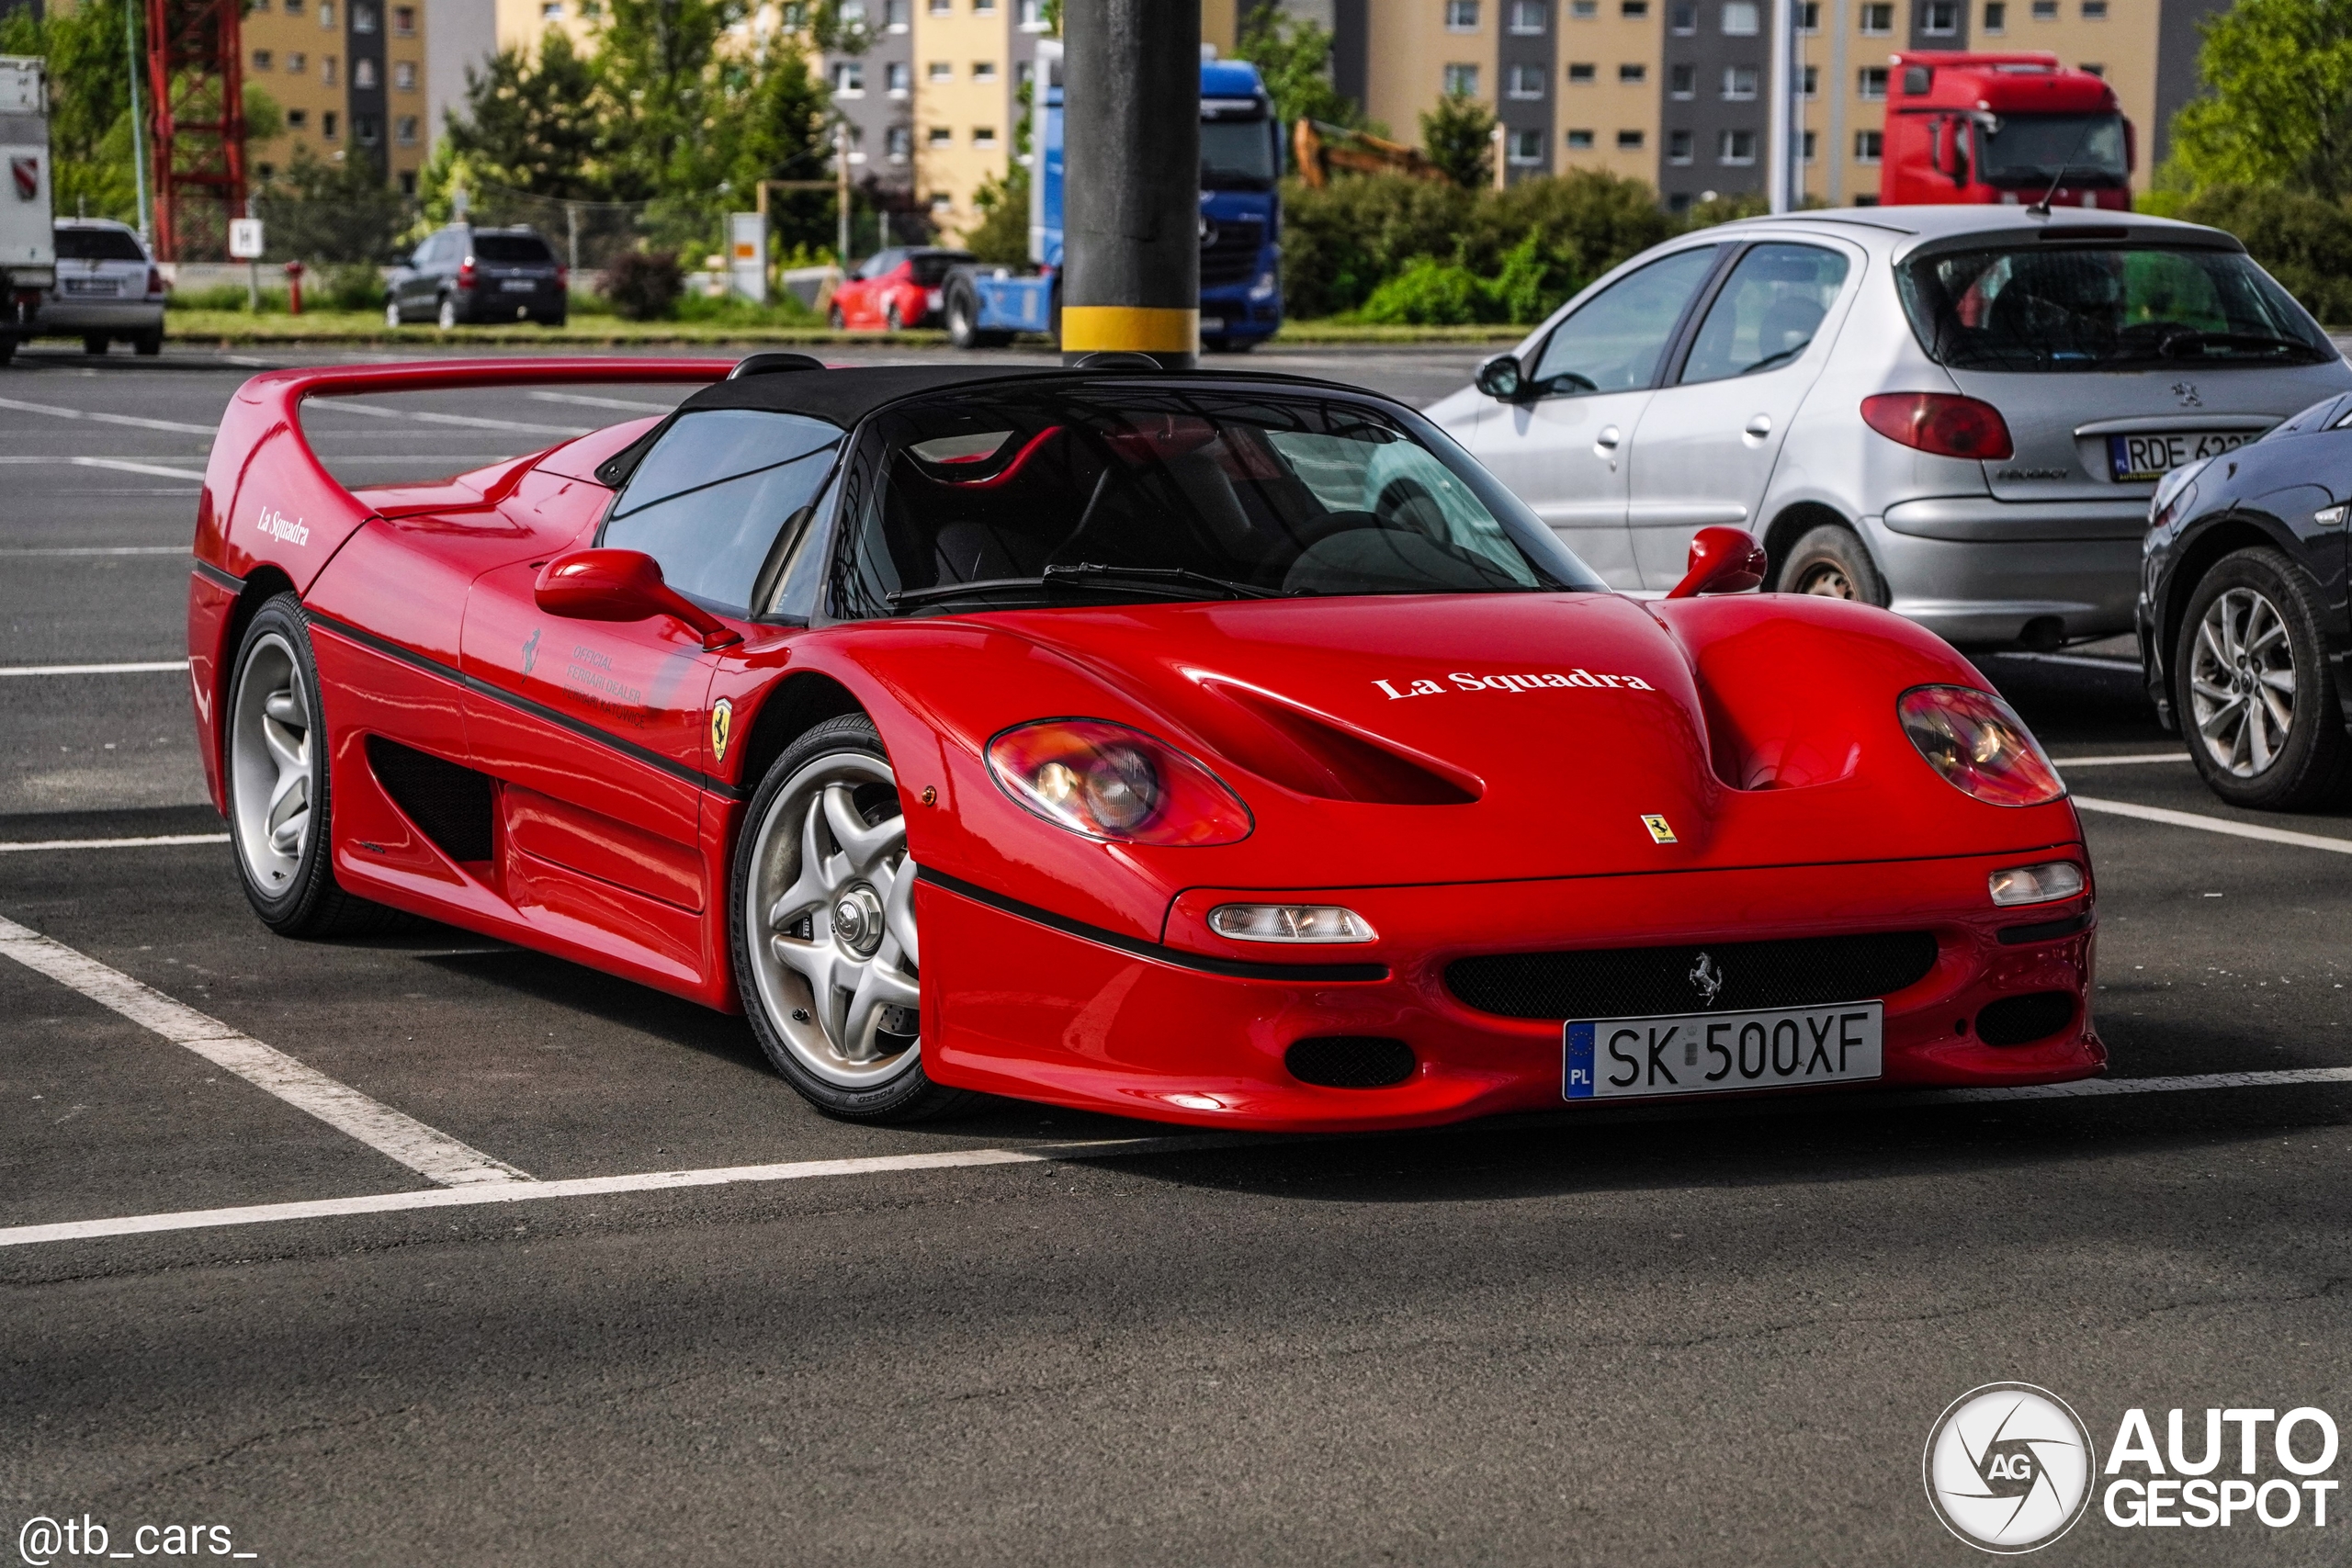 This is the first F50 from Poland